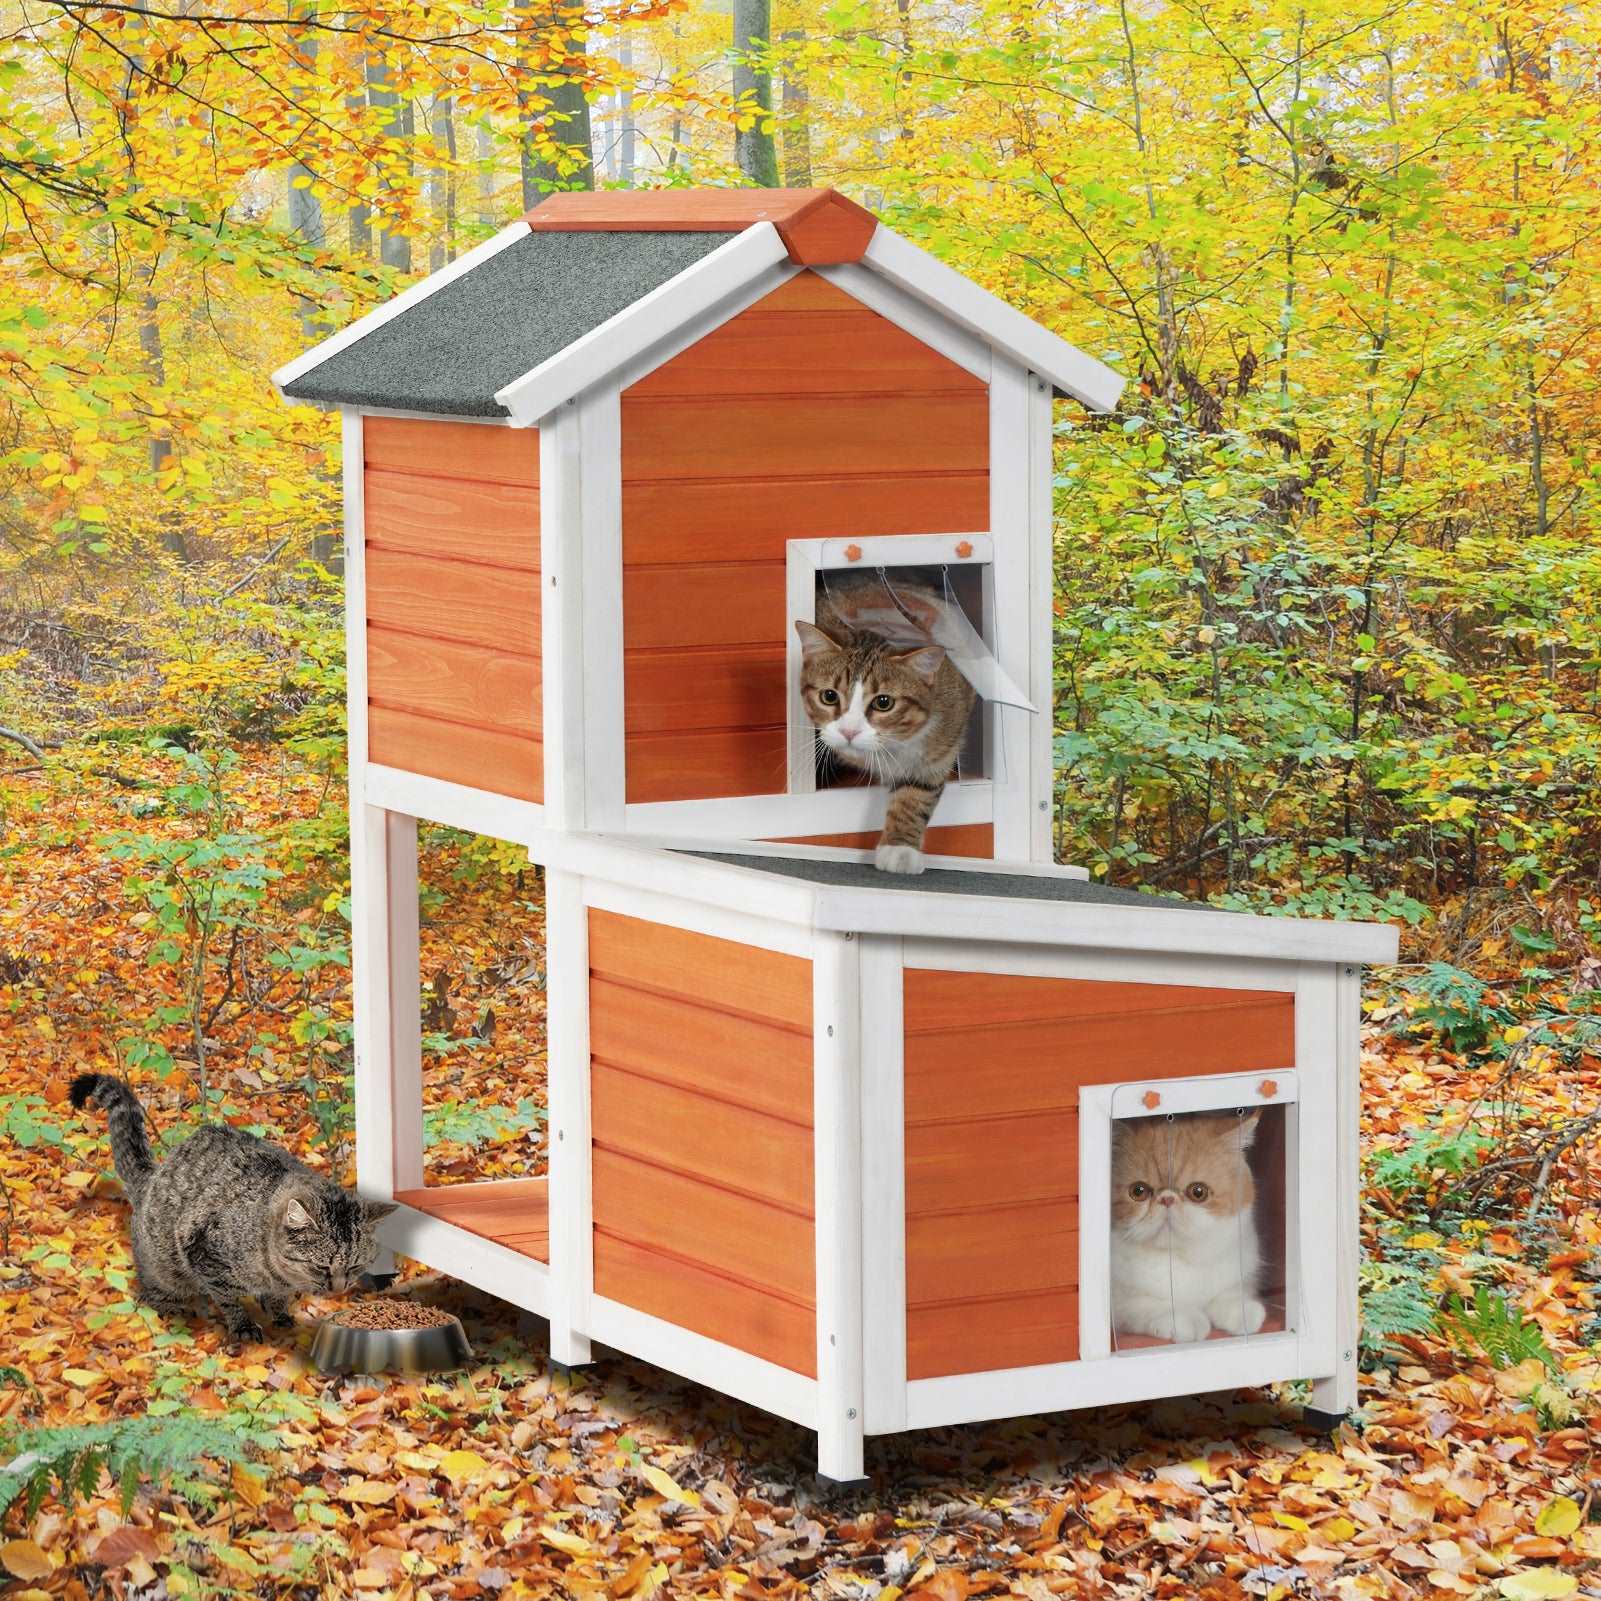 petsfit-2-stroy-cat-house-outdoor-insulated-high-feet-feeding-station-door-curtain-wood-outside-cat-house-bunny-rabbit-hutch-orange-02